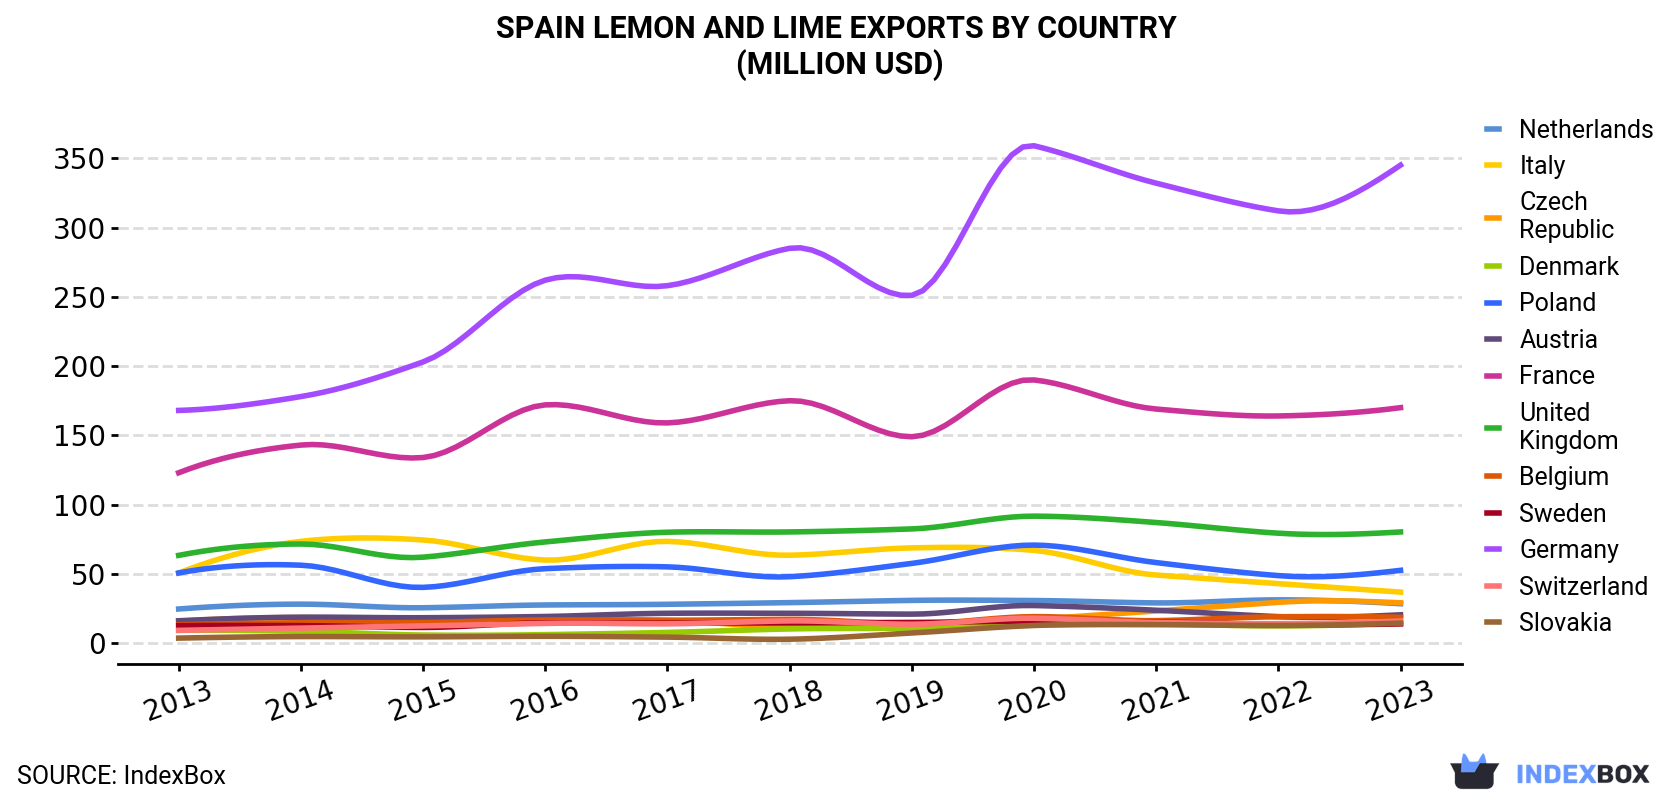 Spain Lemon And Lime Exports By Country (Million USD)